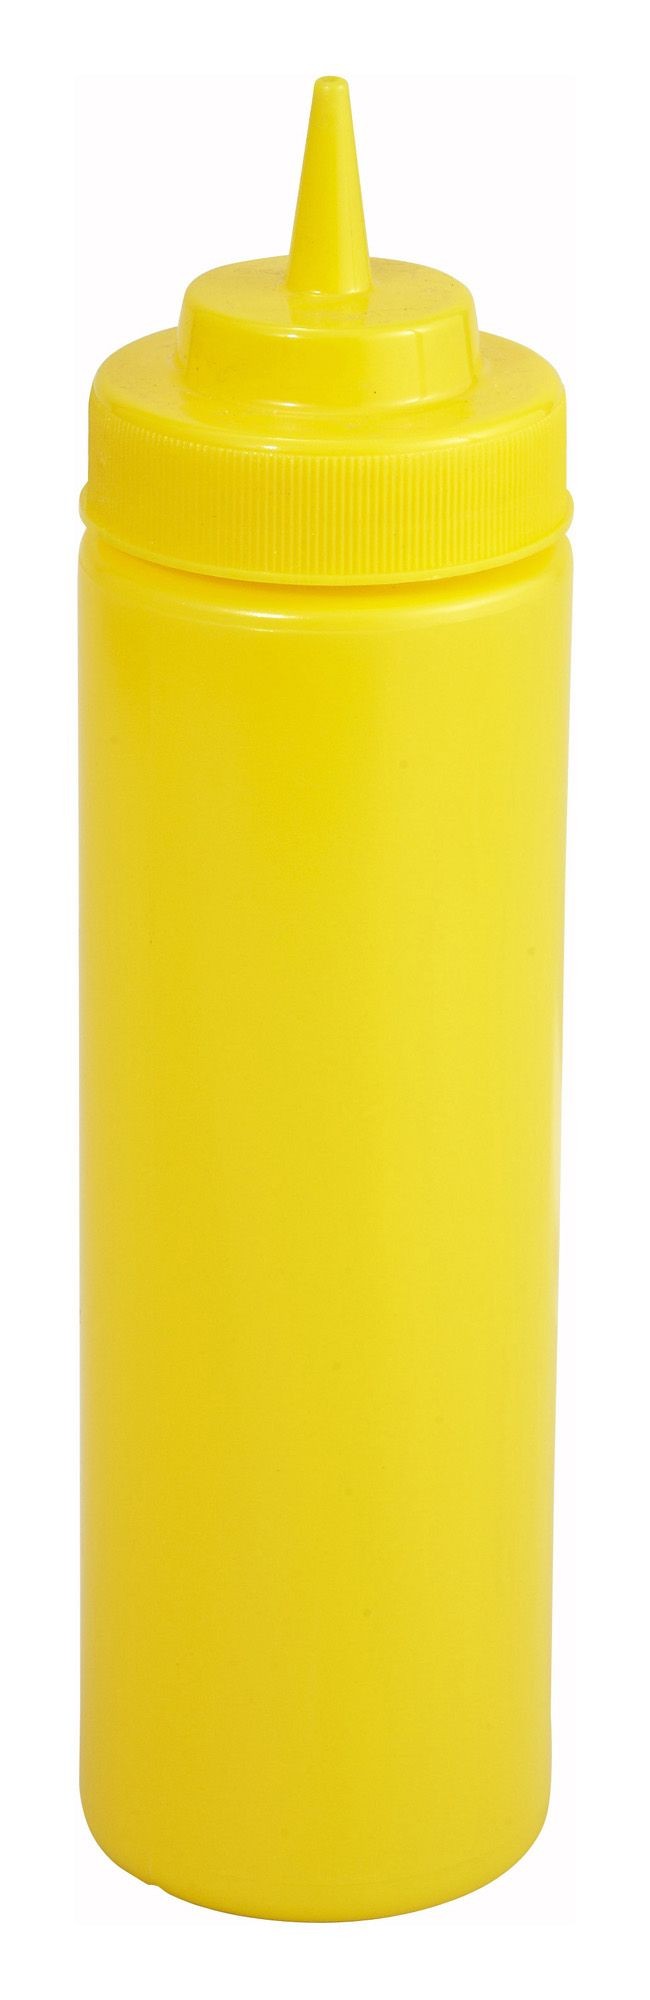 Winco PSW-12Y Yellow Plastic 12 oz. Wide Mouth Squeeze Bottle